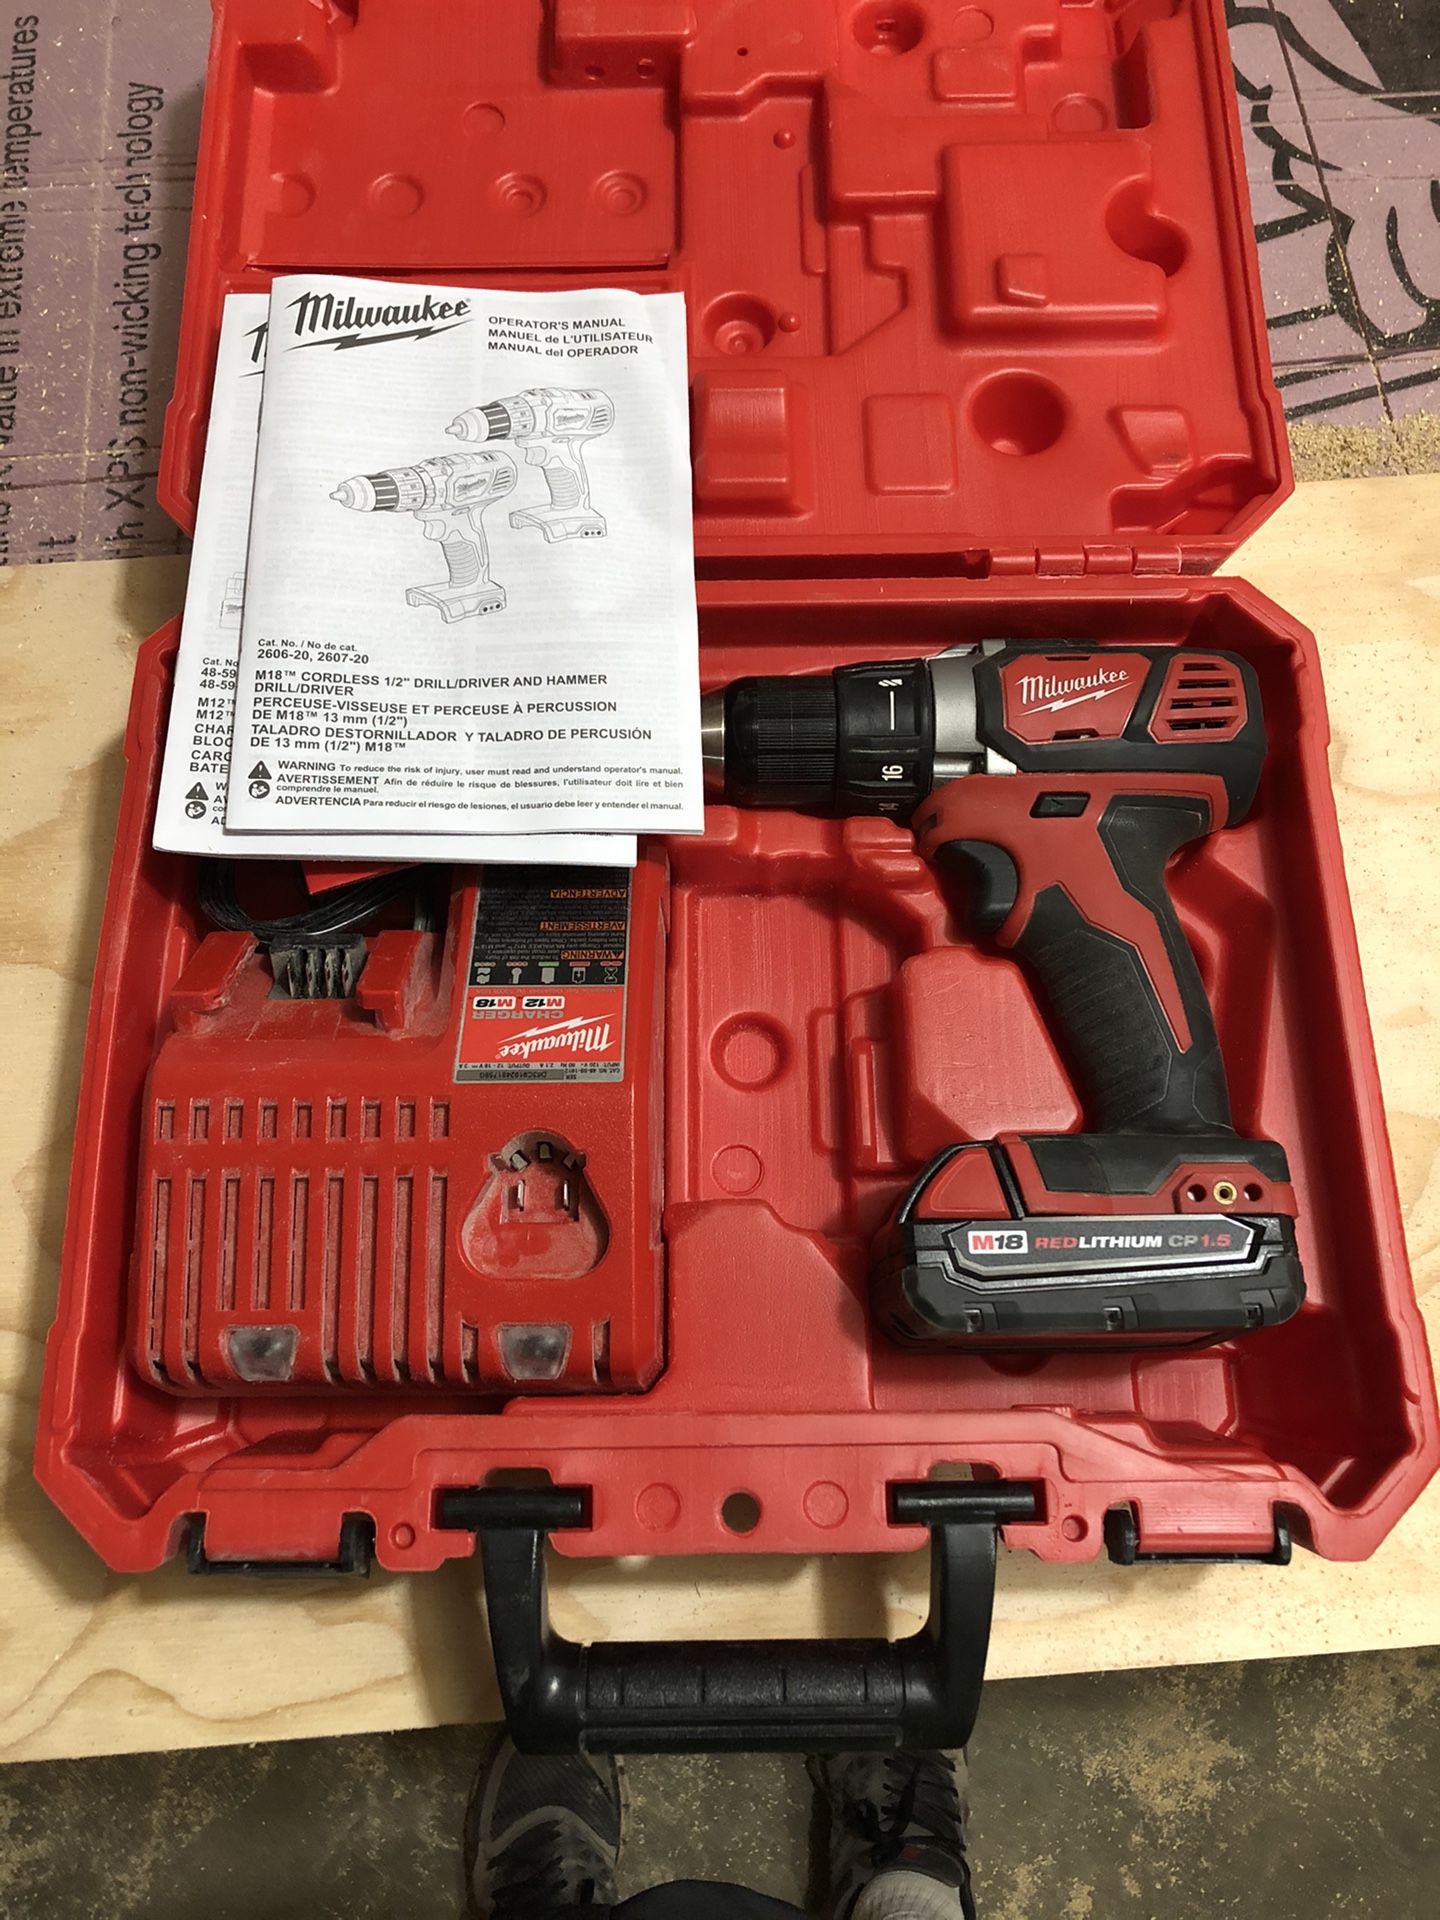 Milwaukee M18 drill/driver, battery, charger and case